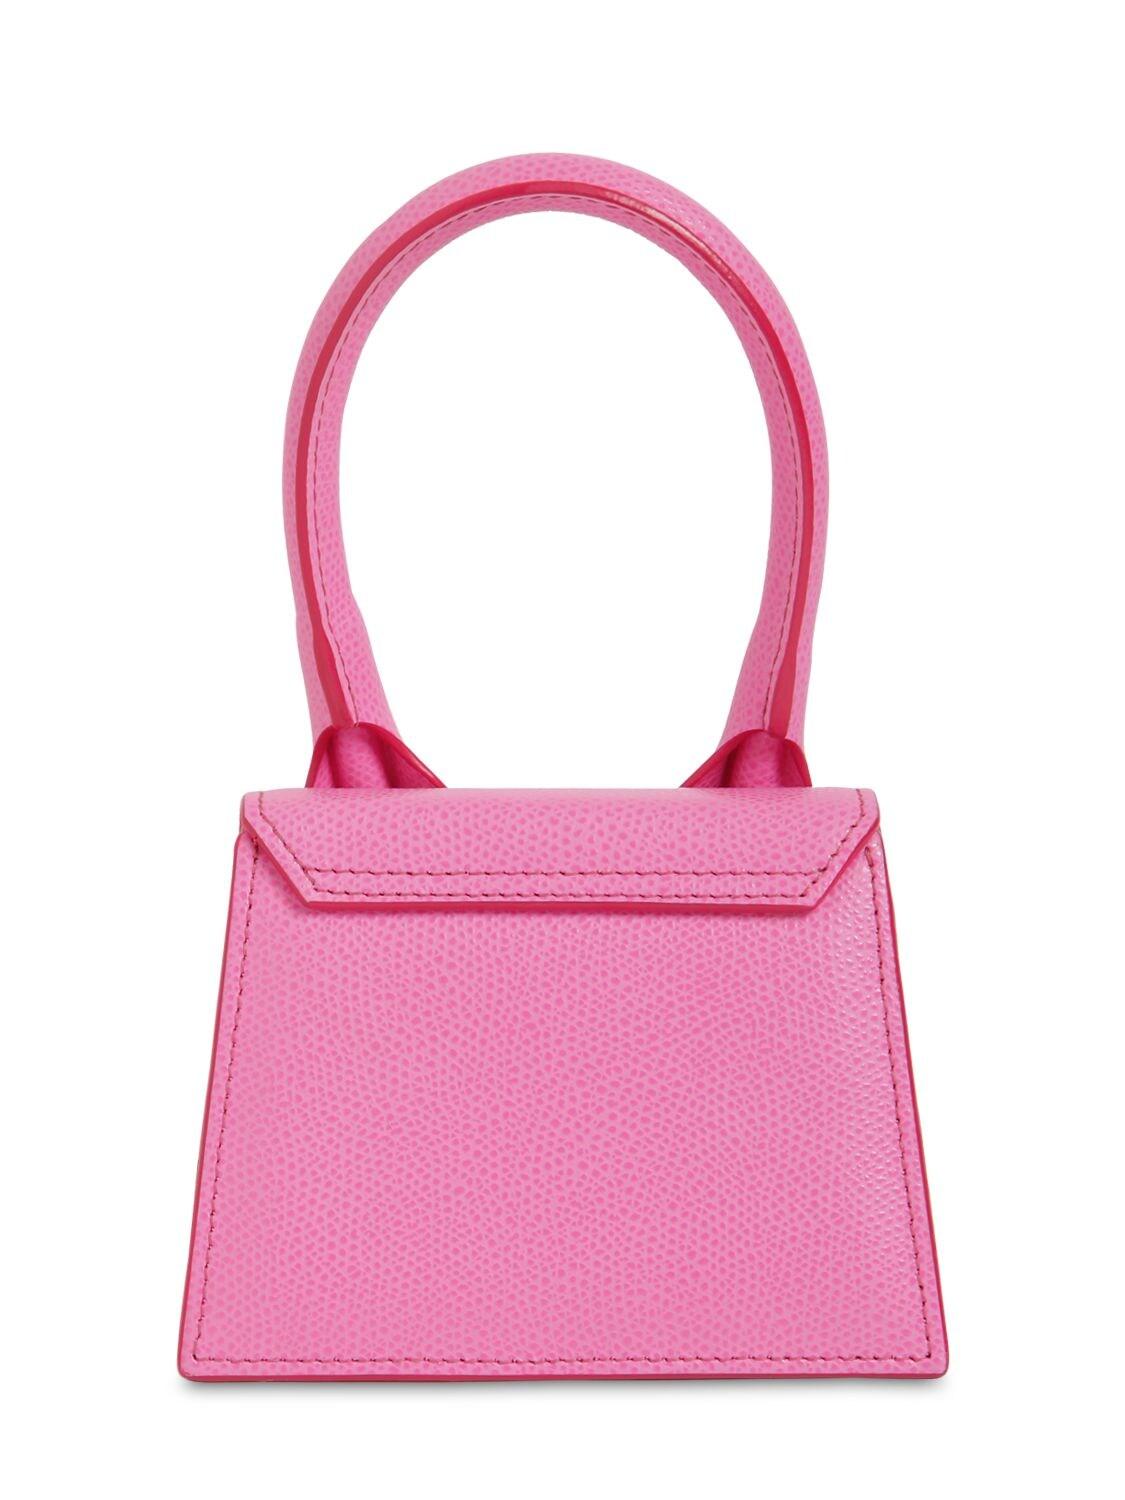 Jacquemus Women's Pink Le Chiquito Hand Bag